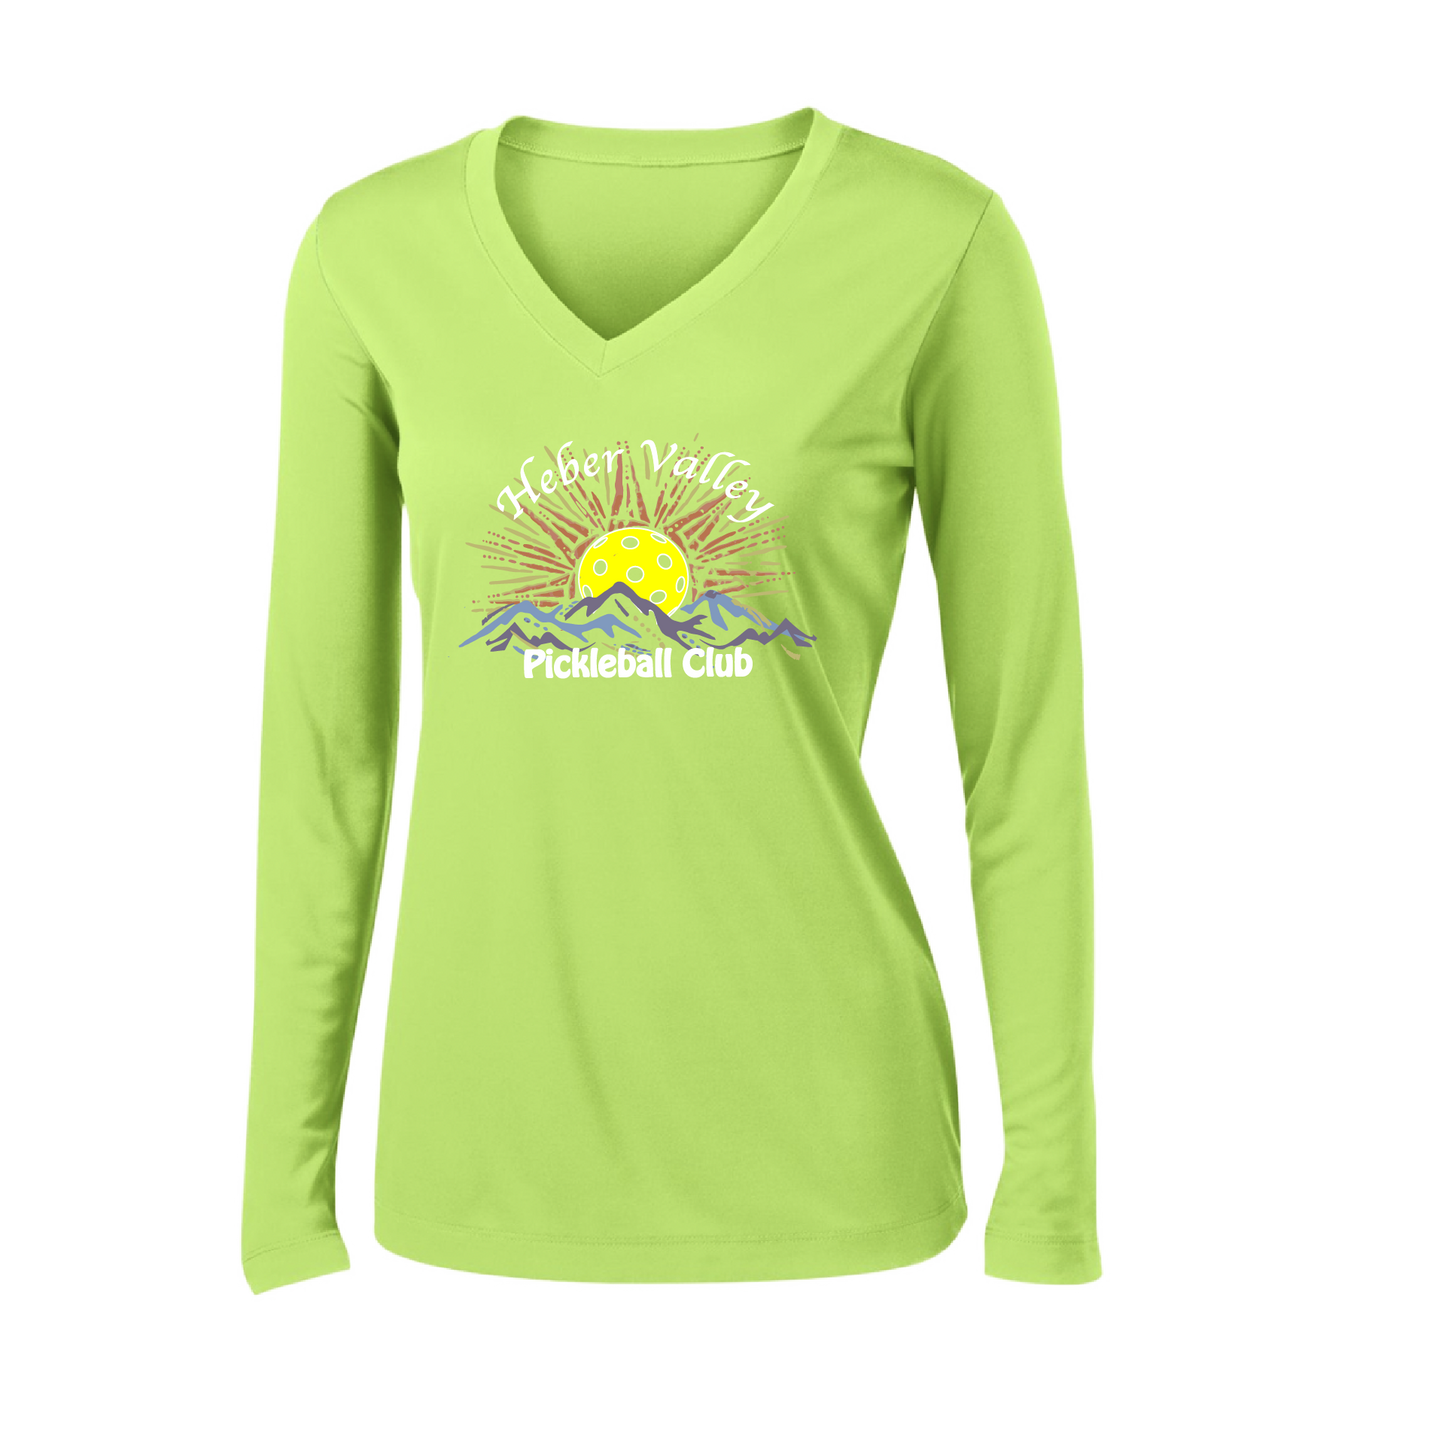 Pickleball Shirt Design: Heber Valley Pickleball Club   Women's Styles: Long Sleeve V-Neck  Turn up the volume in this Women's shirt with its perfect mix of softness and attitude. Material is ultra-comfortable with moisture wicking properties and tri-blend softness. PosiCharge technology locks in color. Highly breathable and lightweight.